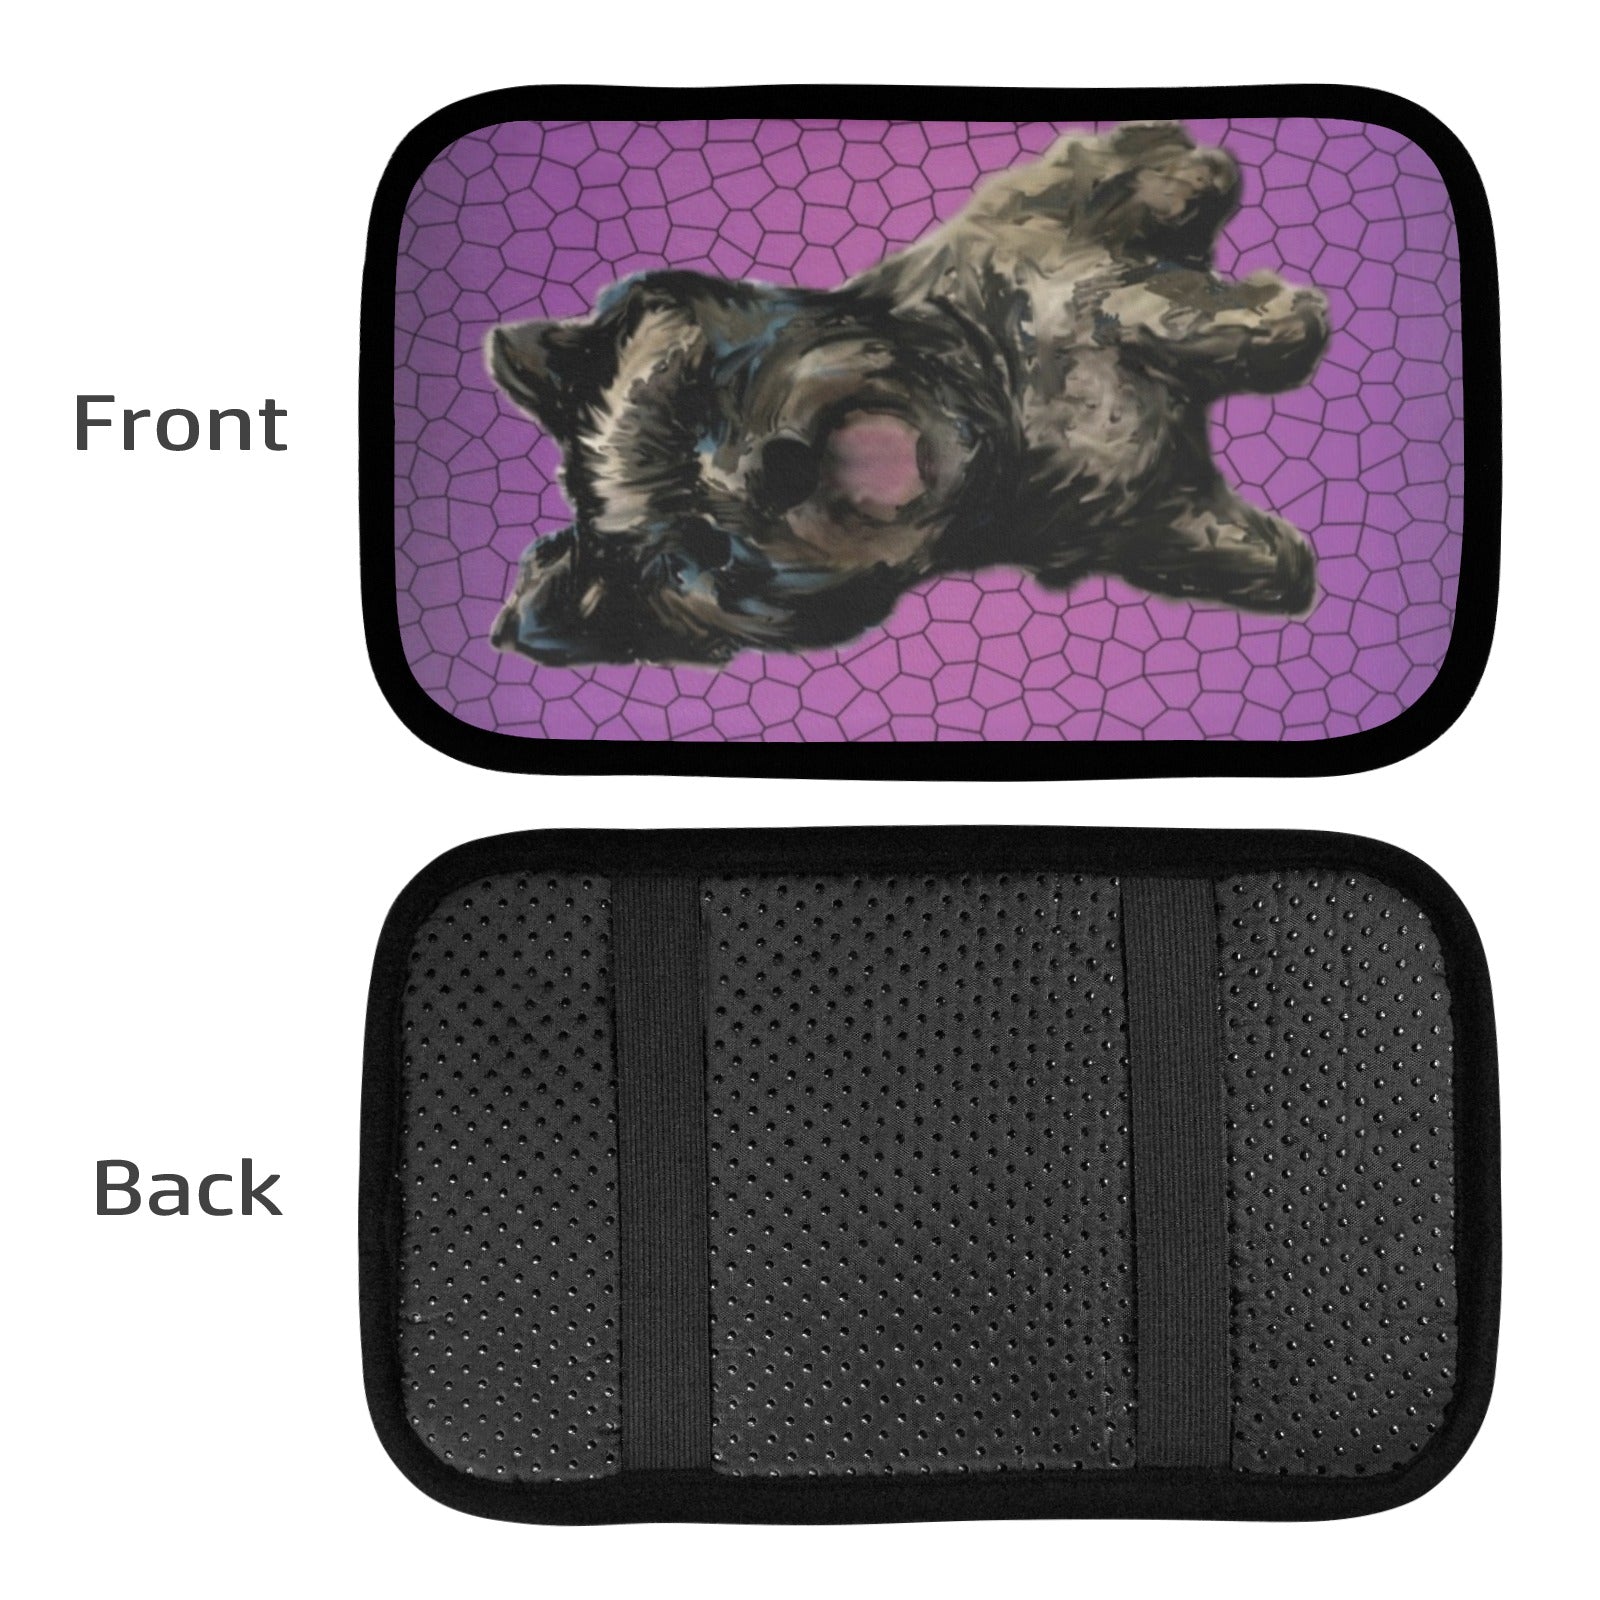 Cairn Terrier Car Console Cover - Black